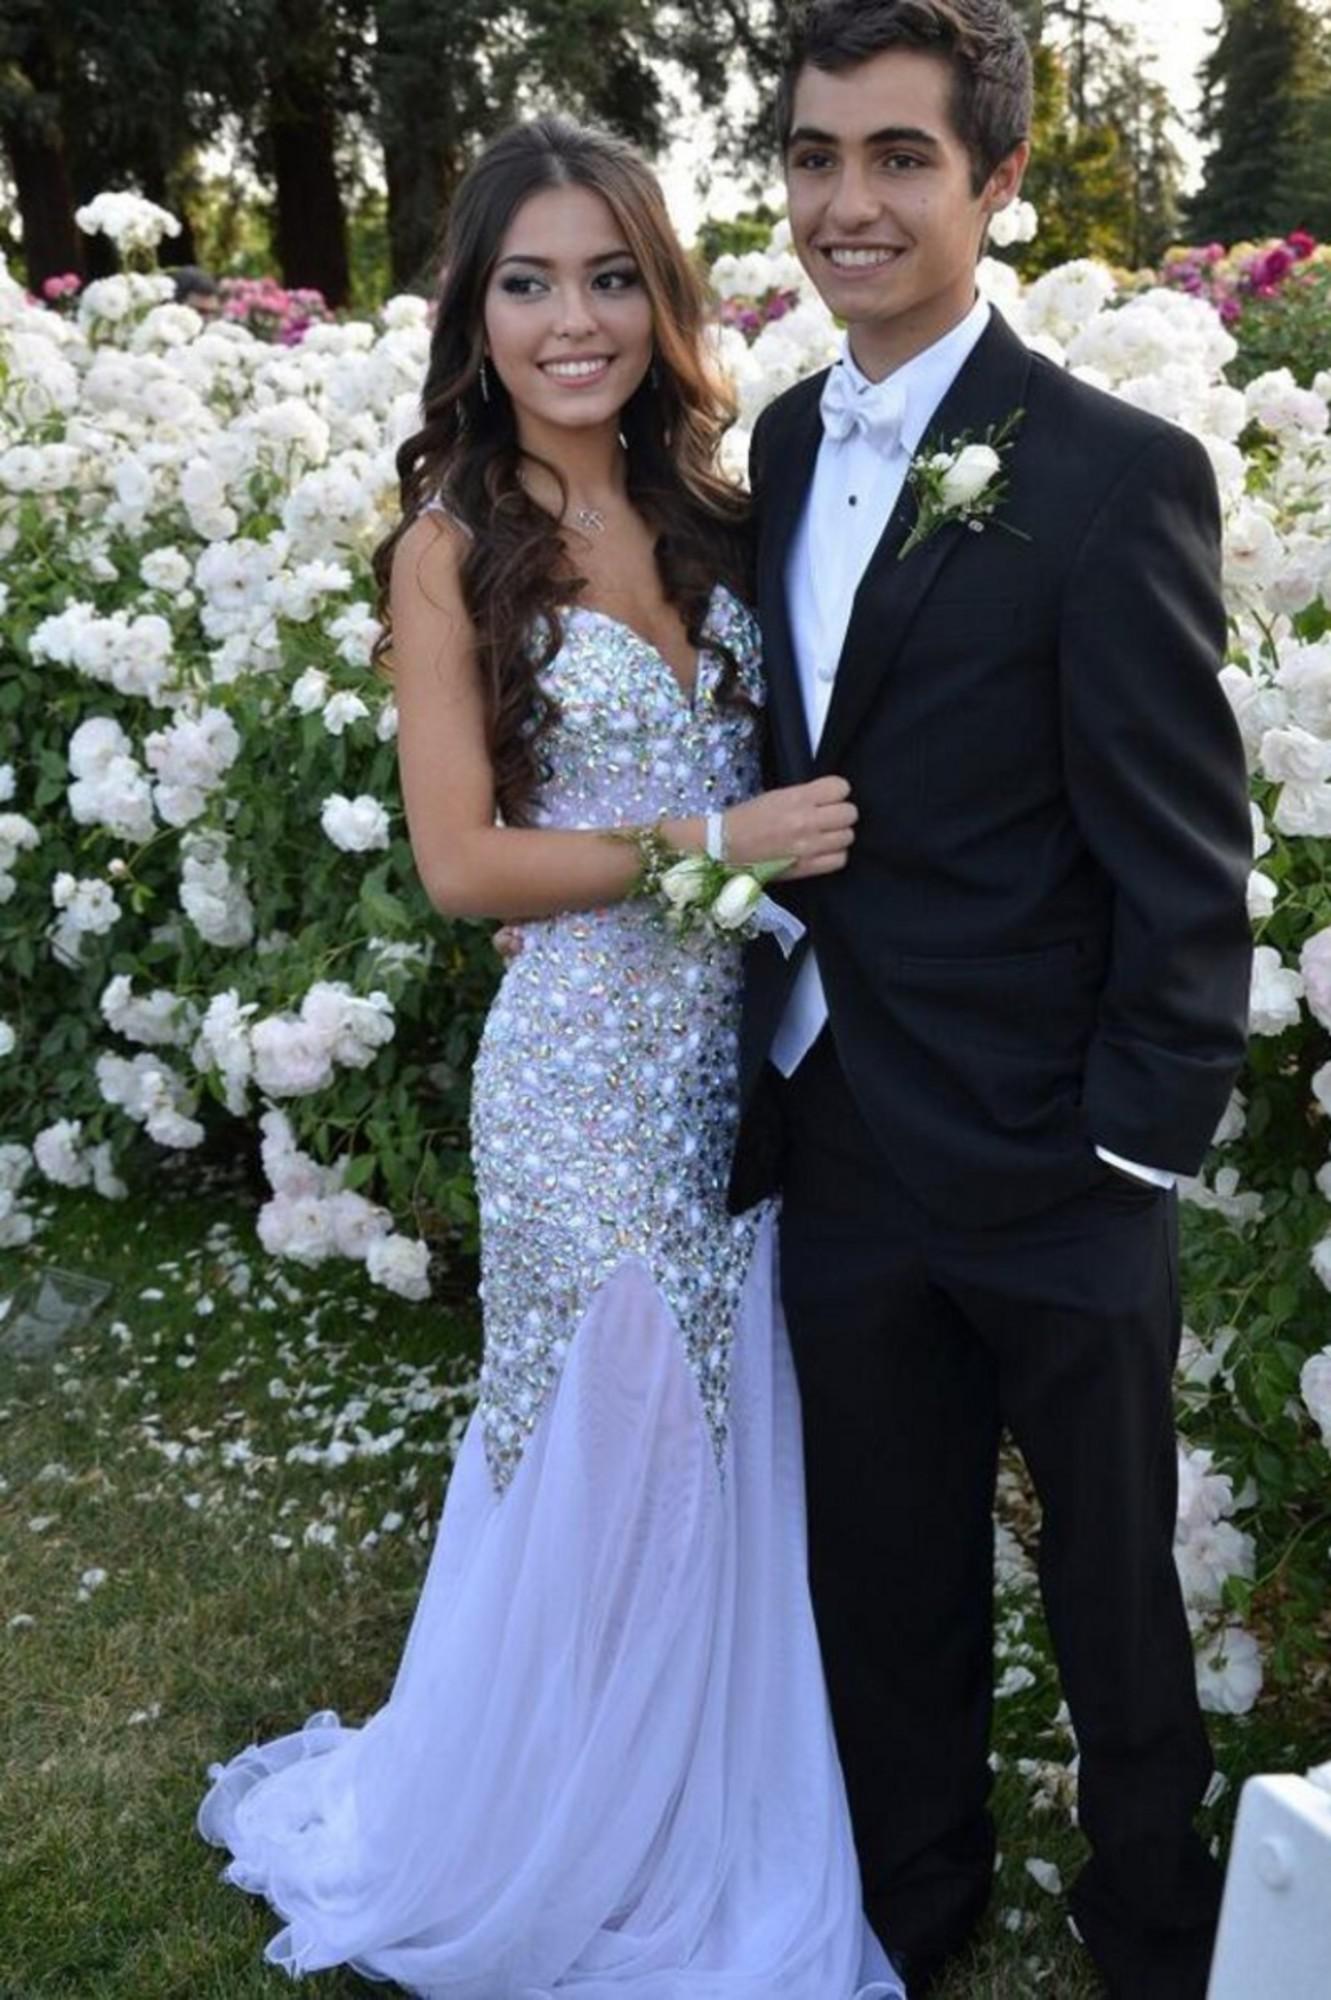 Prom Outfit Ideas For Couples 2019: Prom Dresses,  Prom couples,  Prom Suit  